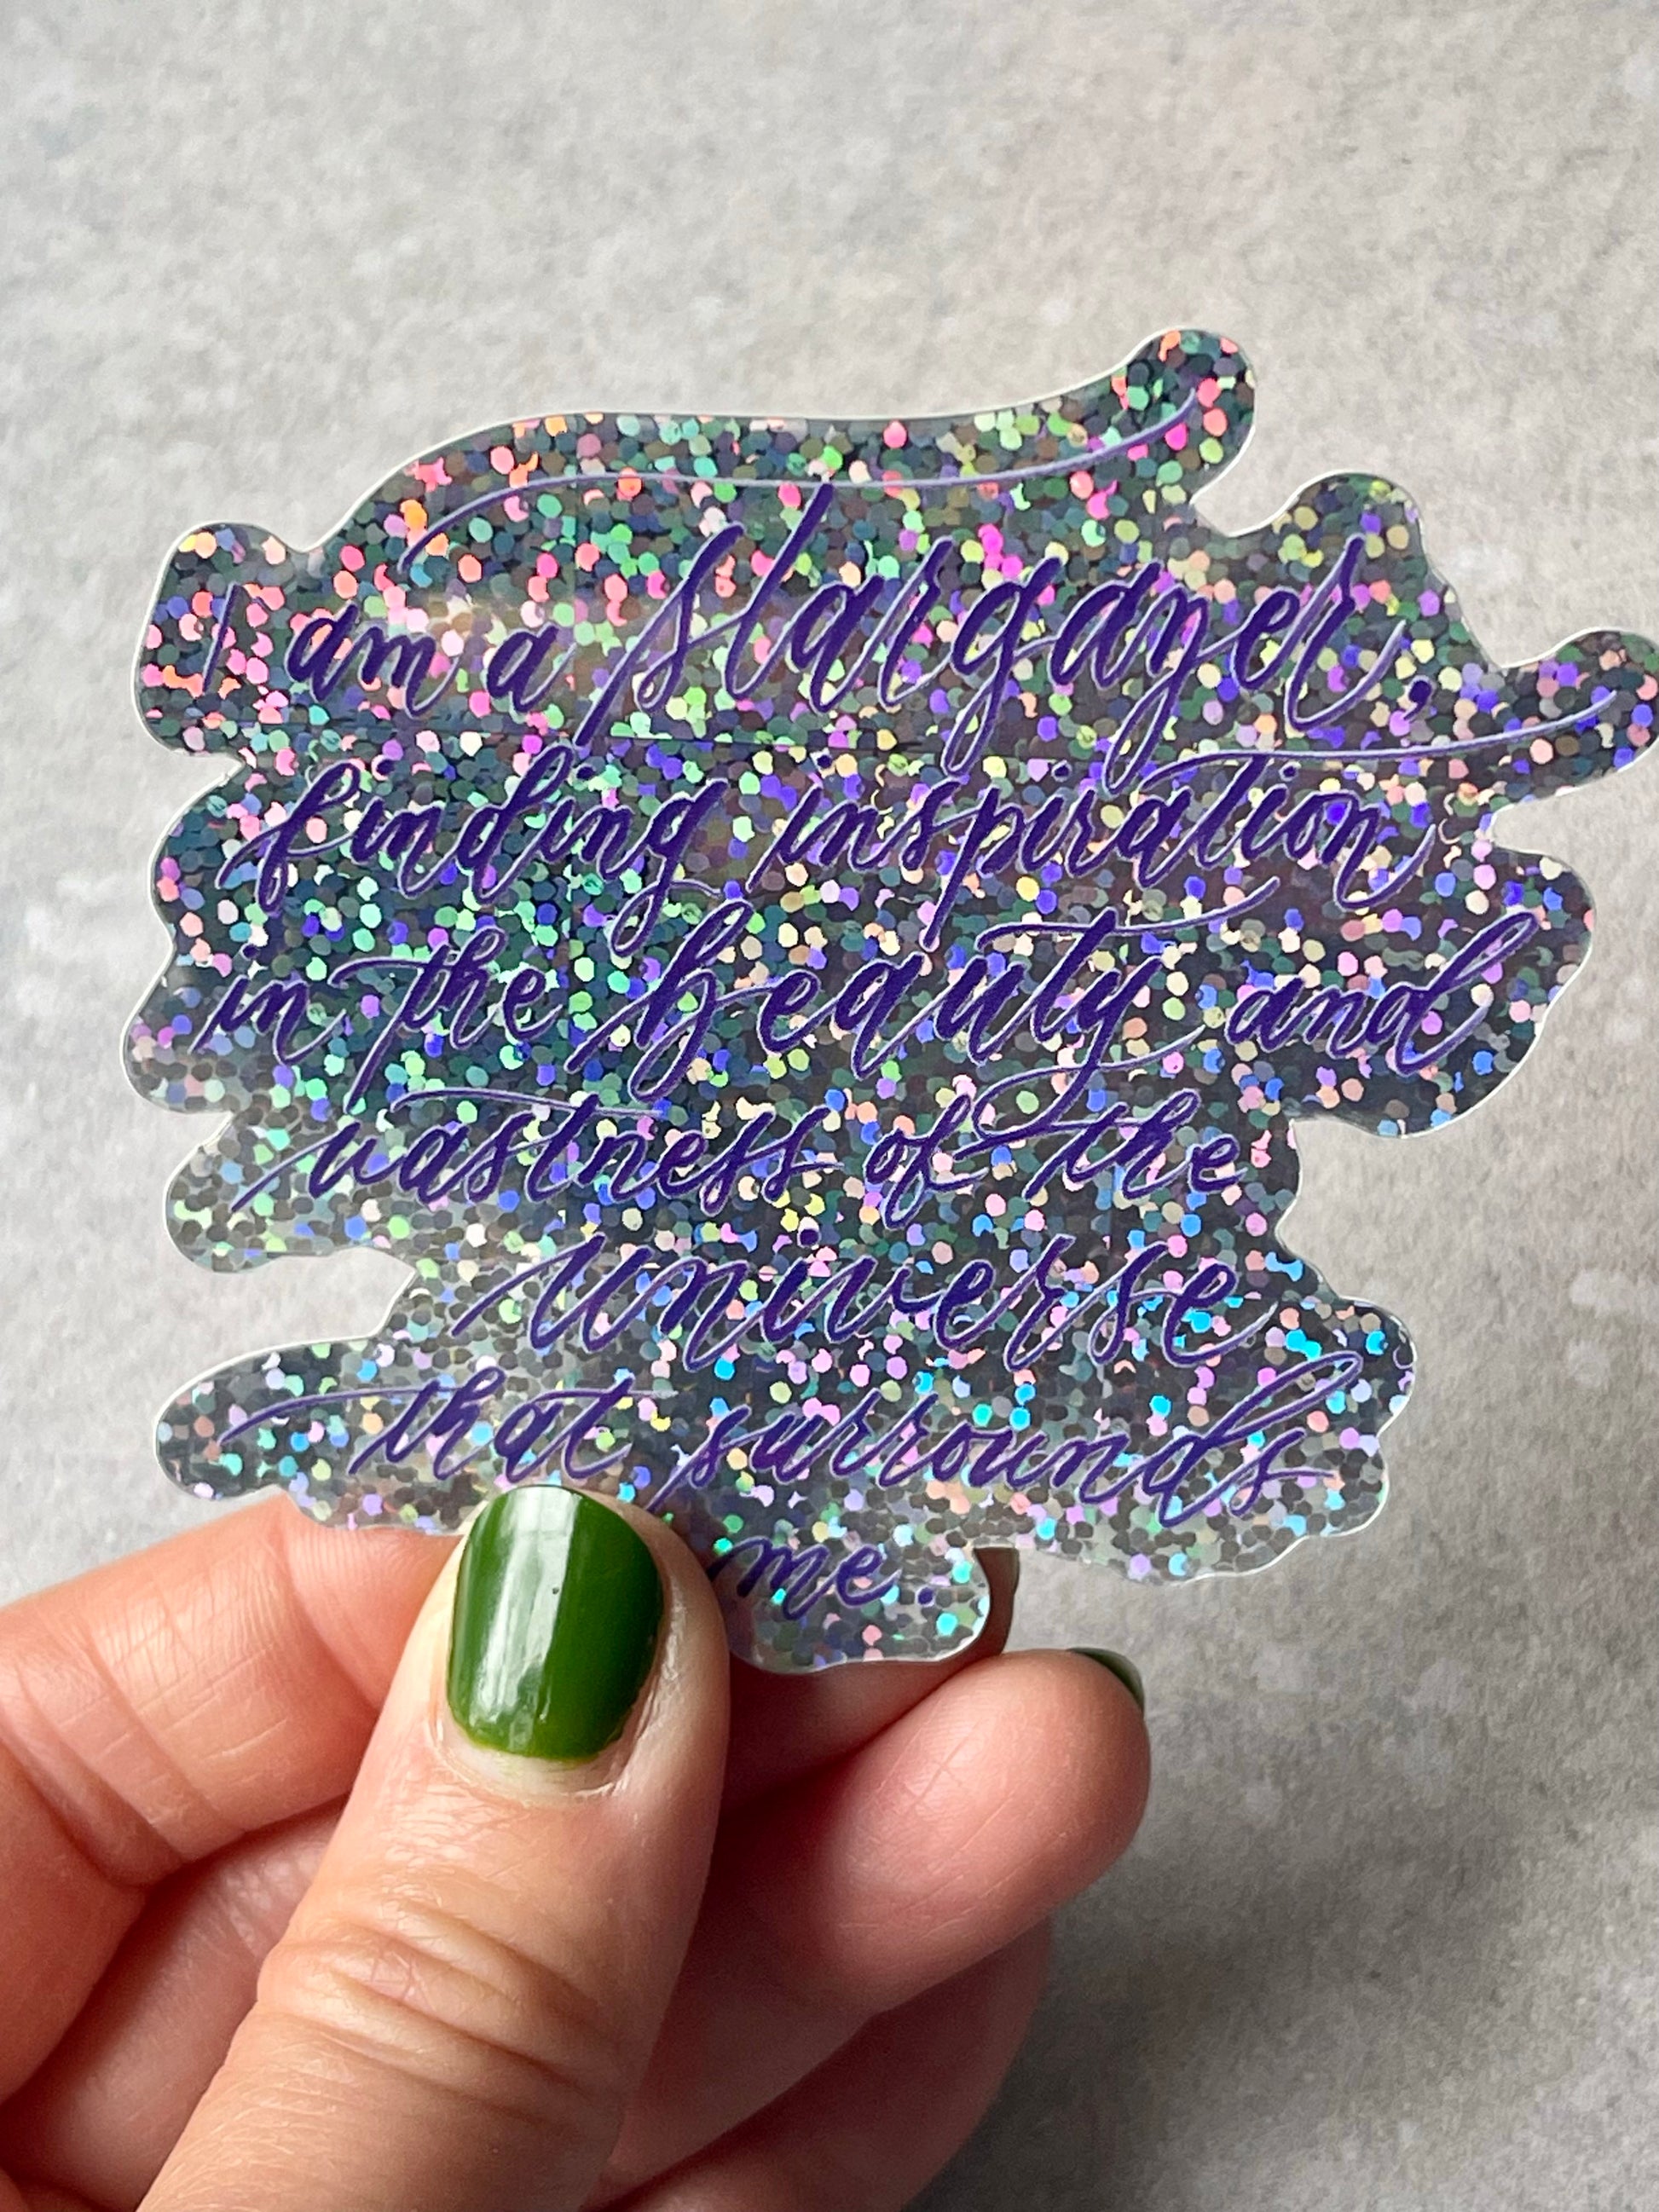 I am a stargazer finding inspiration in the beauty and vastness of the universe that surrounds me script calligraphy glitter sticker in shiny view catching light with shiny ombre purple and pink tones